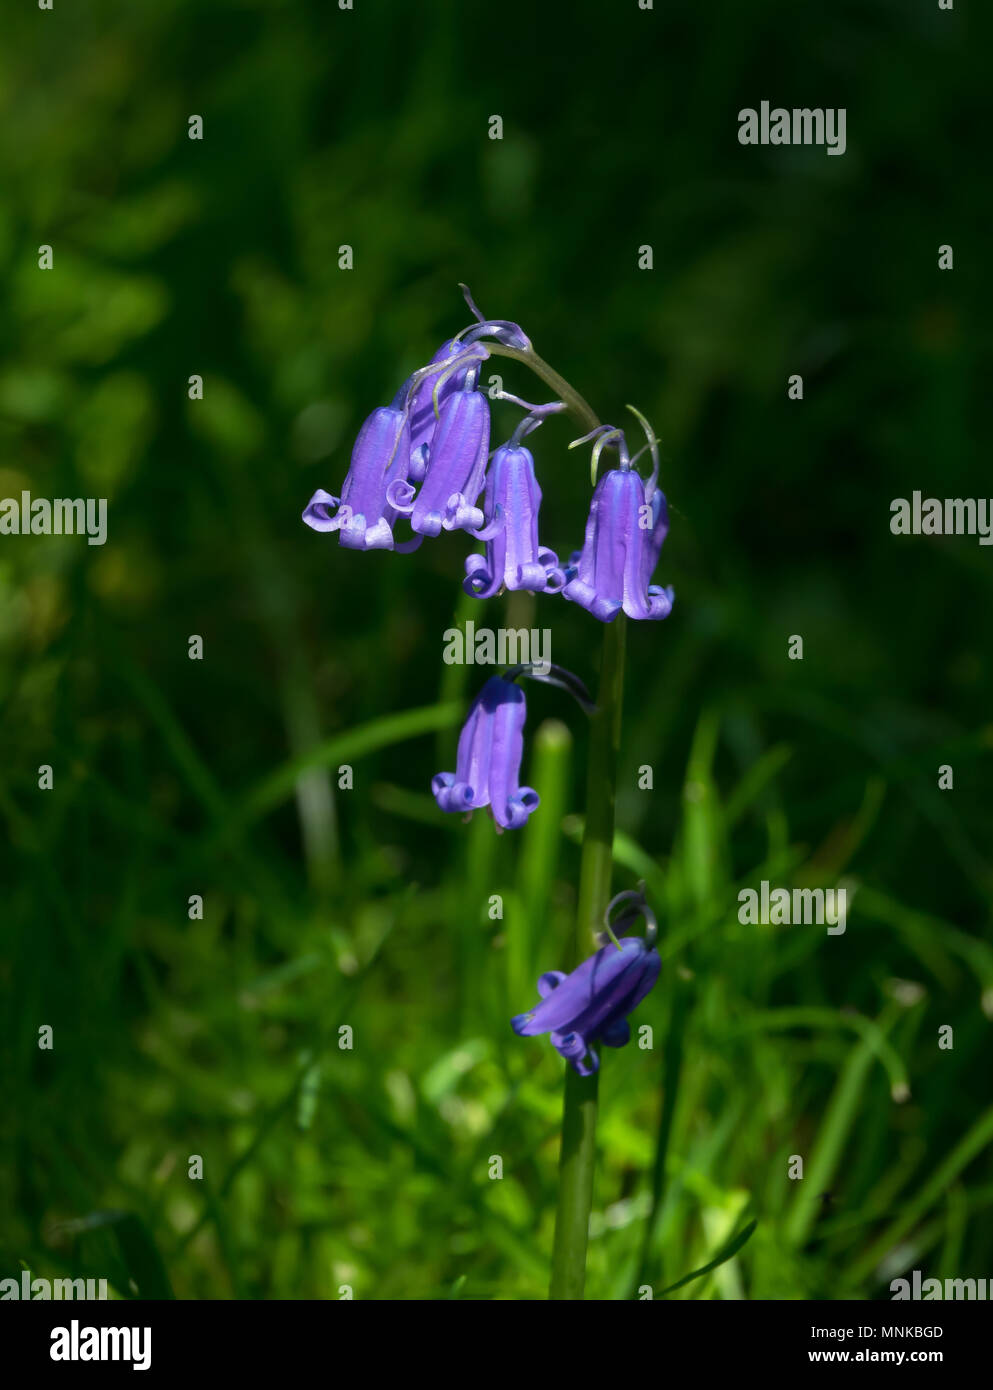 Native English Bluebells in Sussex countryside during Springtime. Stock Photo